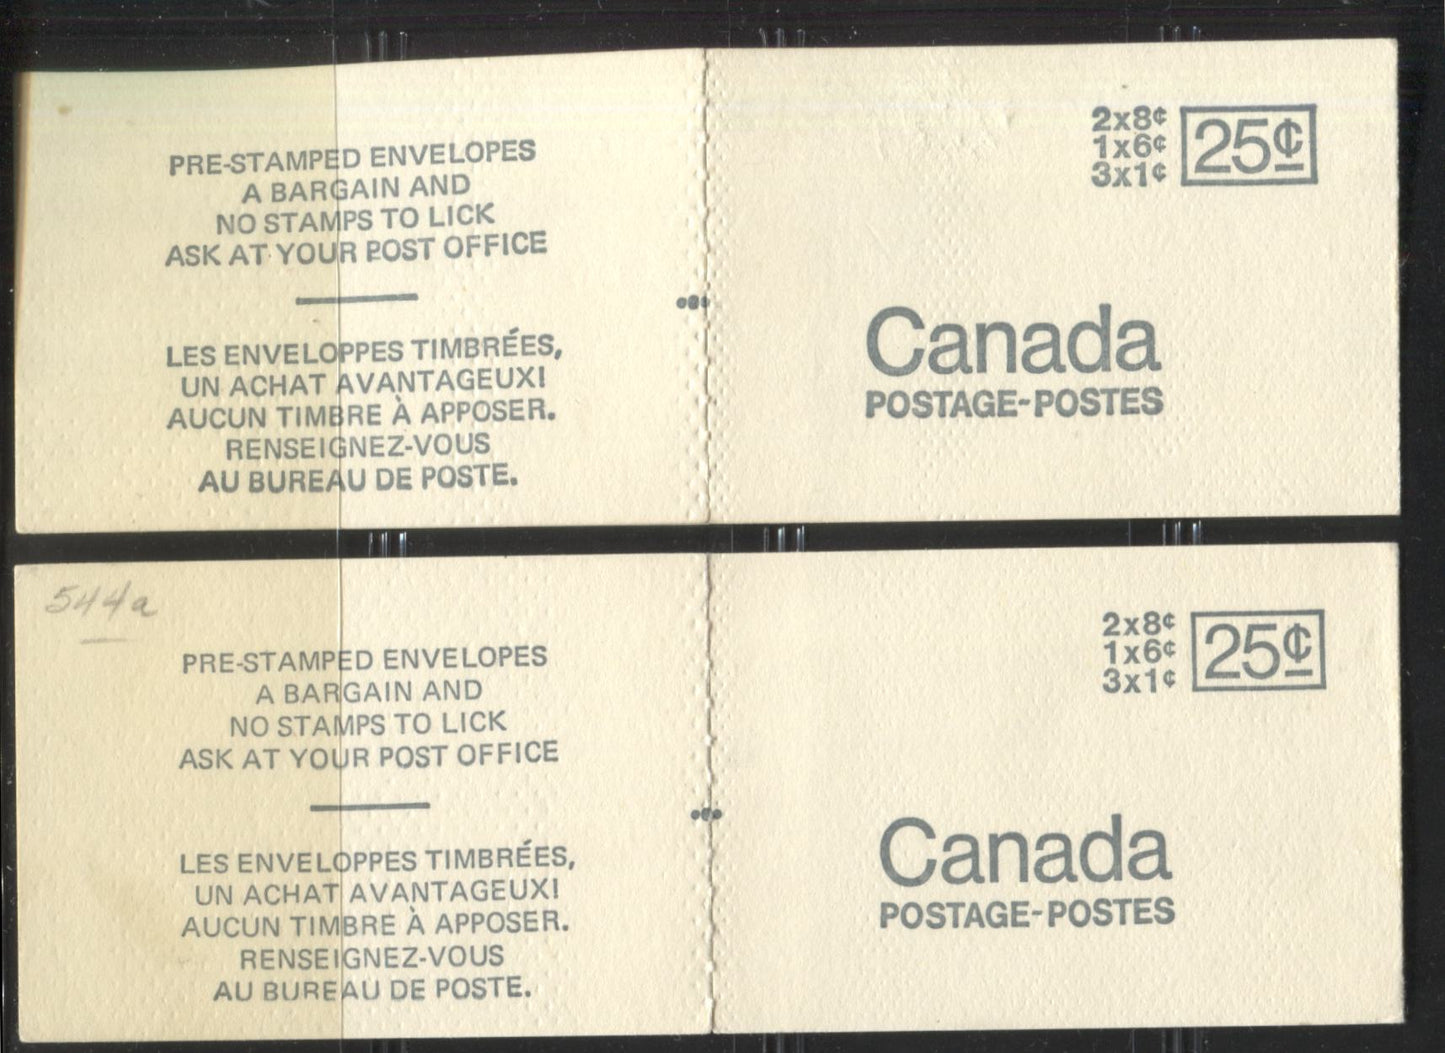 Lot #56 Canada McCann #BK69q, r 1c Purple Brown, 6c Black, And 8c Slate, 1967-1973 Centennial Issue, A Specialized Lot of Two 25c Booklets, Type 2 Pre Stamped Cover, Black Sealing Strip, Different MF-fl Papers, Setting C As Described in Harris